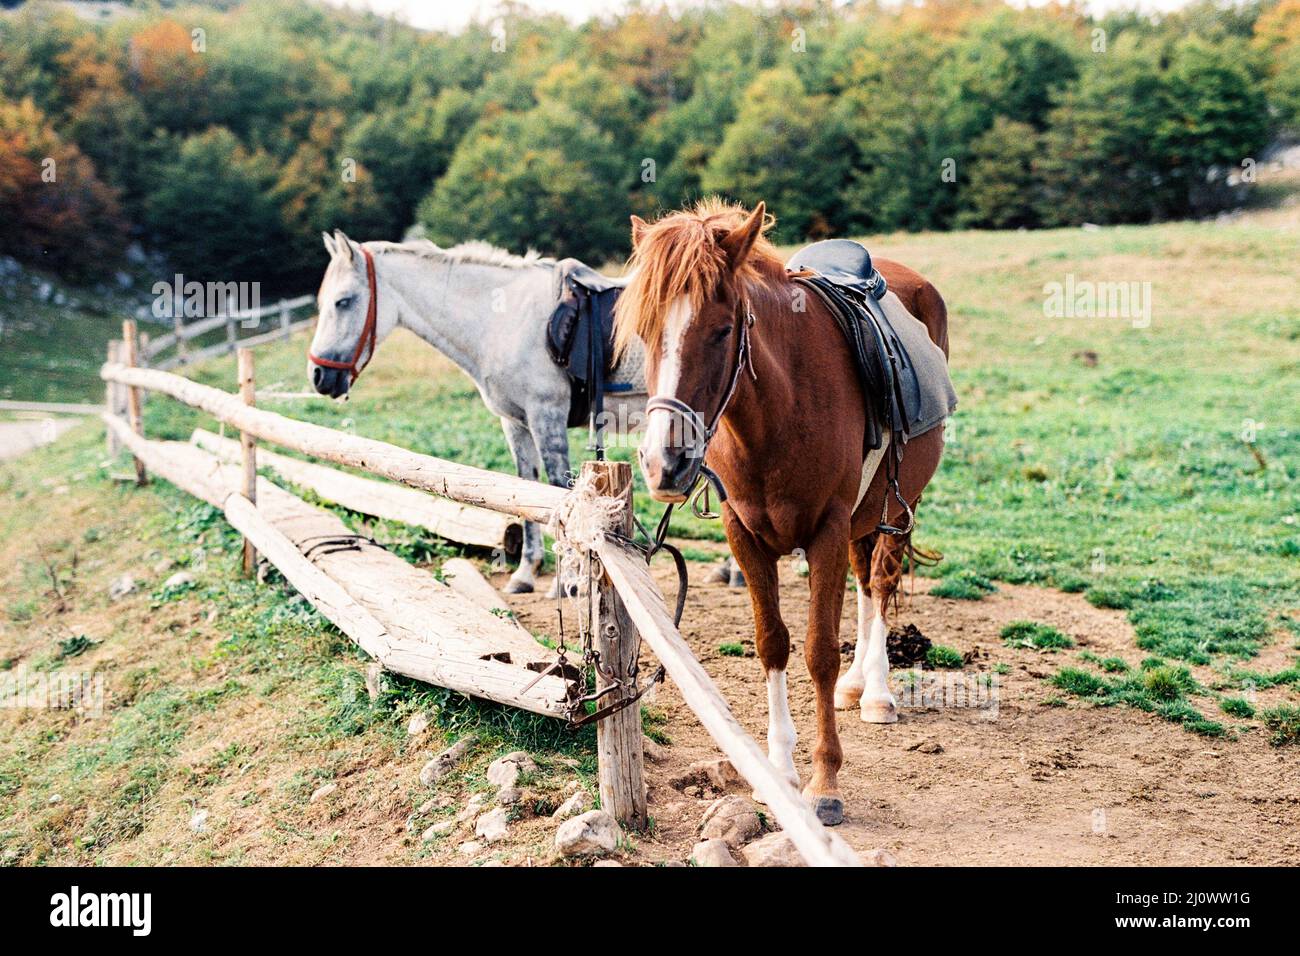 Horses on the farm stand at the hitching post Stock Photo